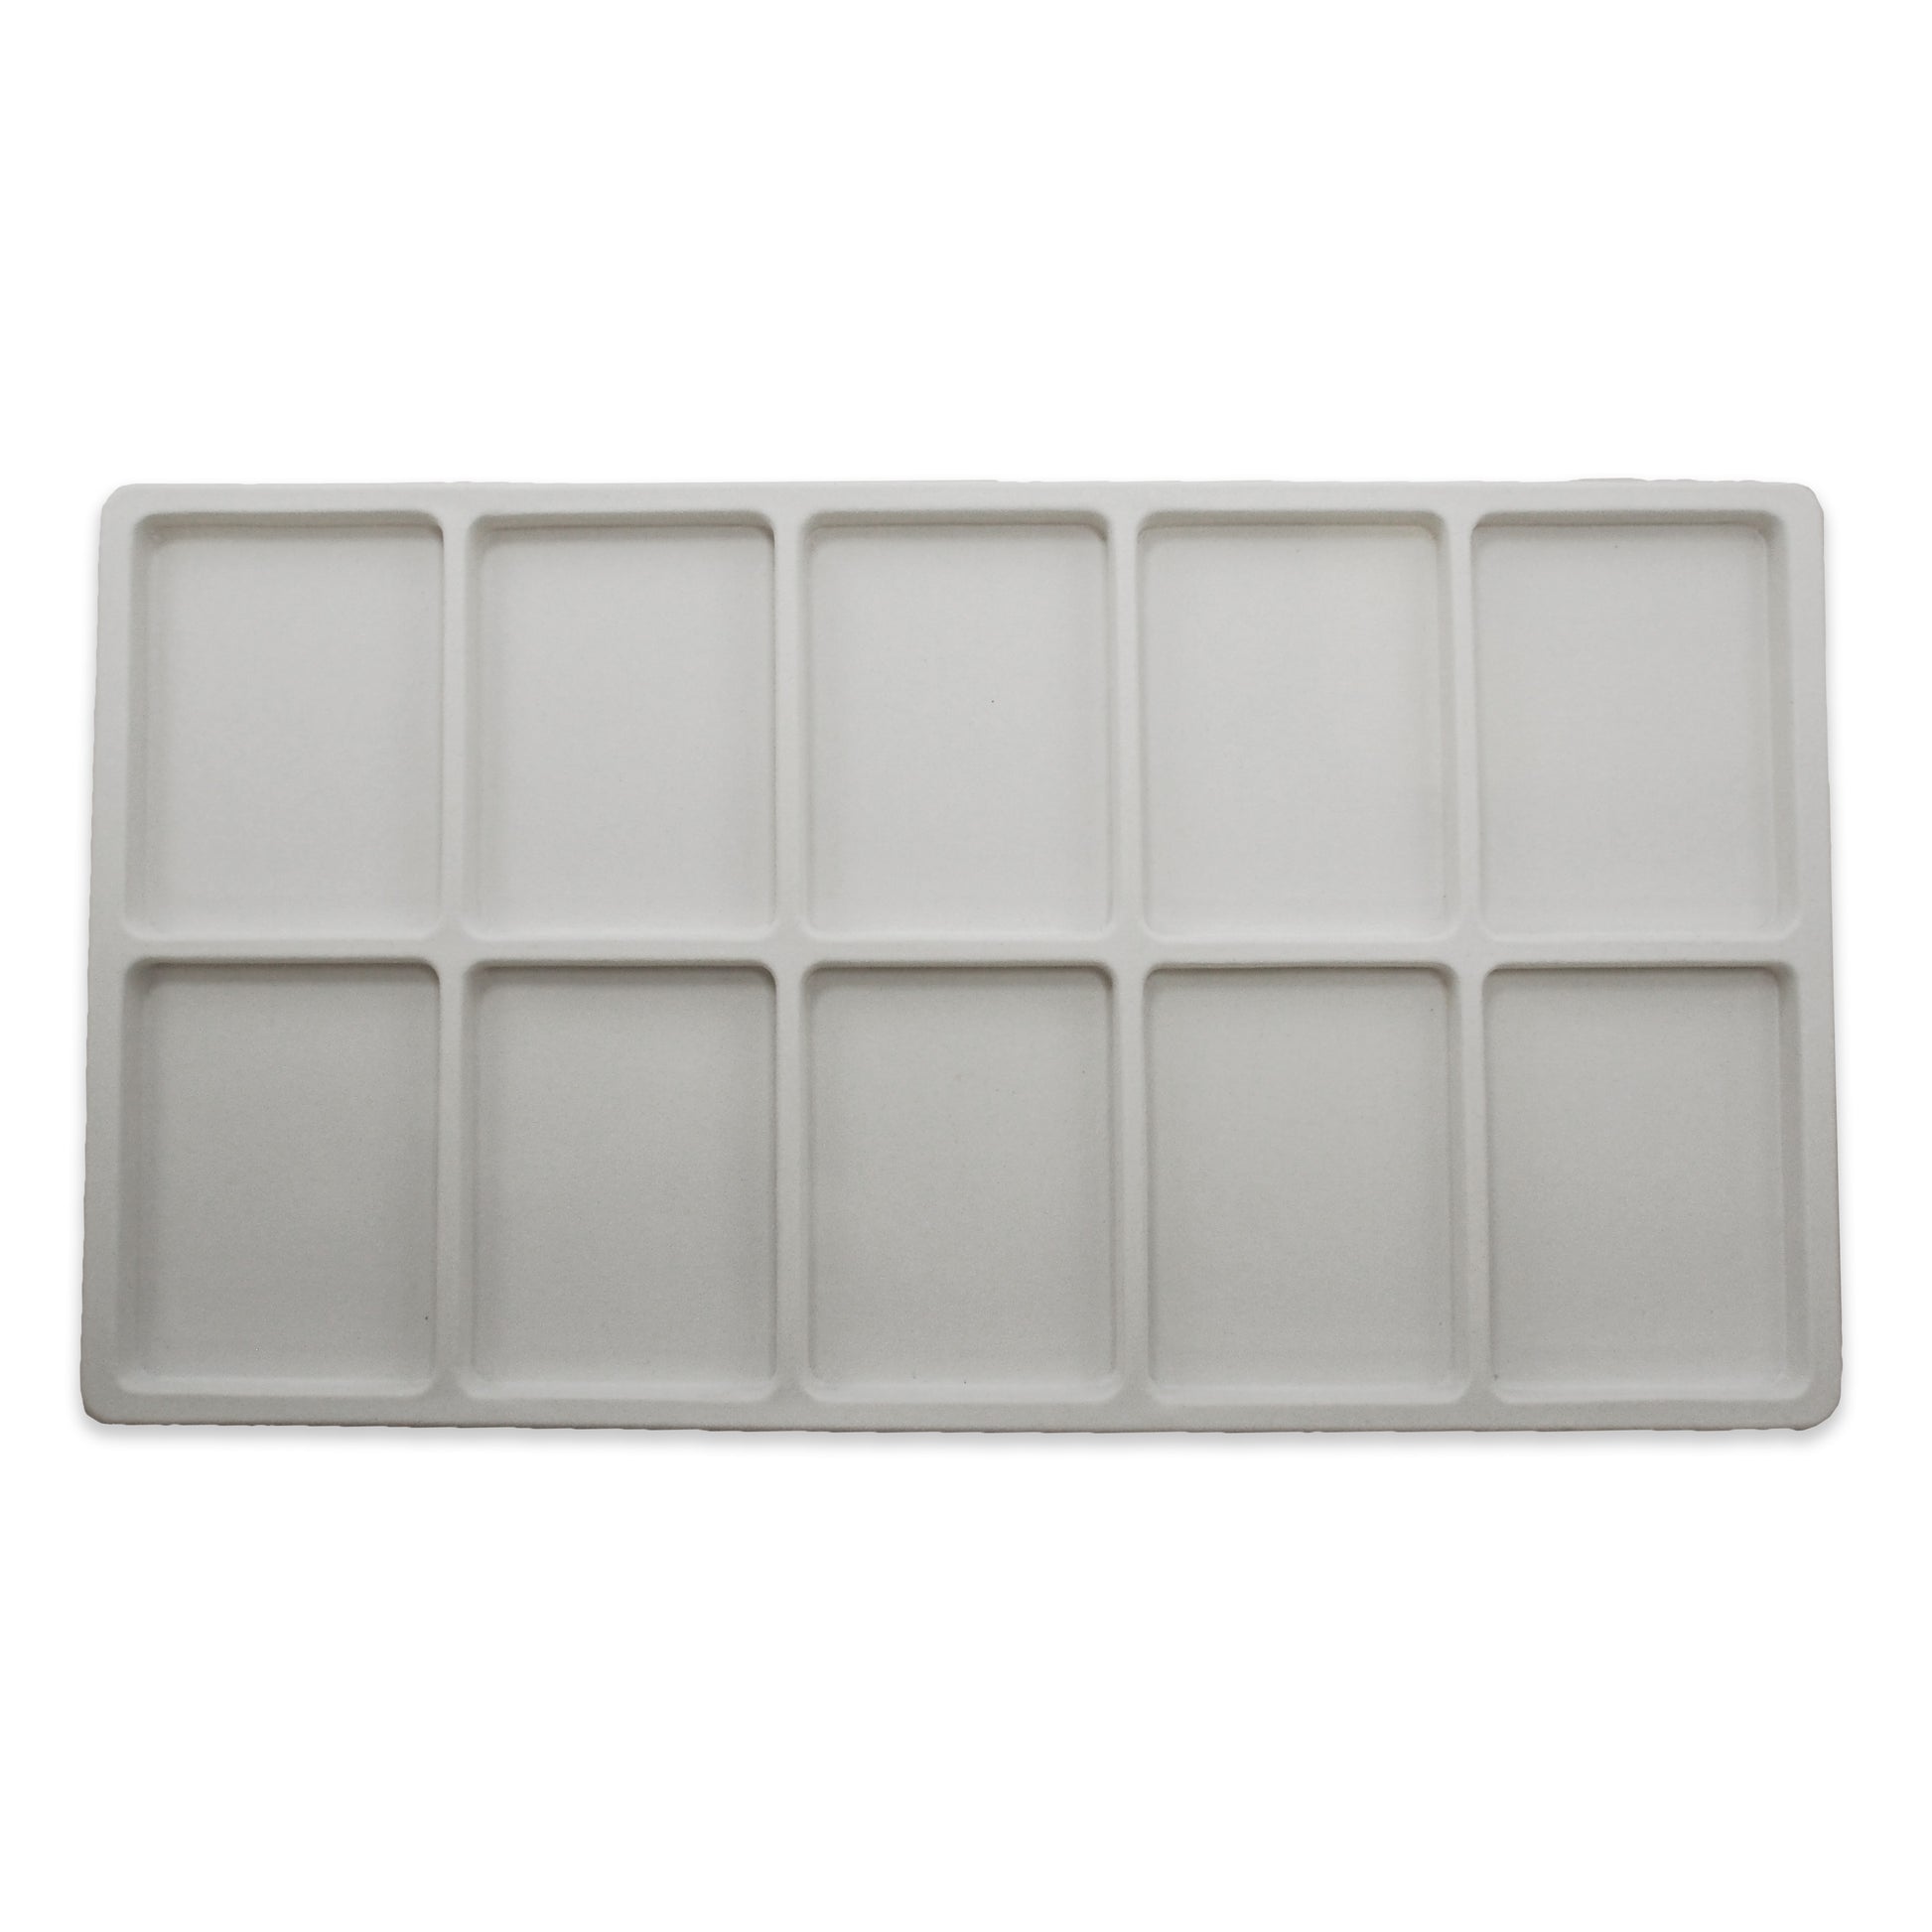 White Flocked Plastic Compartment Tray Insert – CuteBox Company